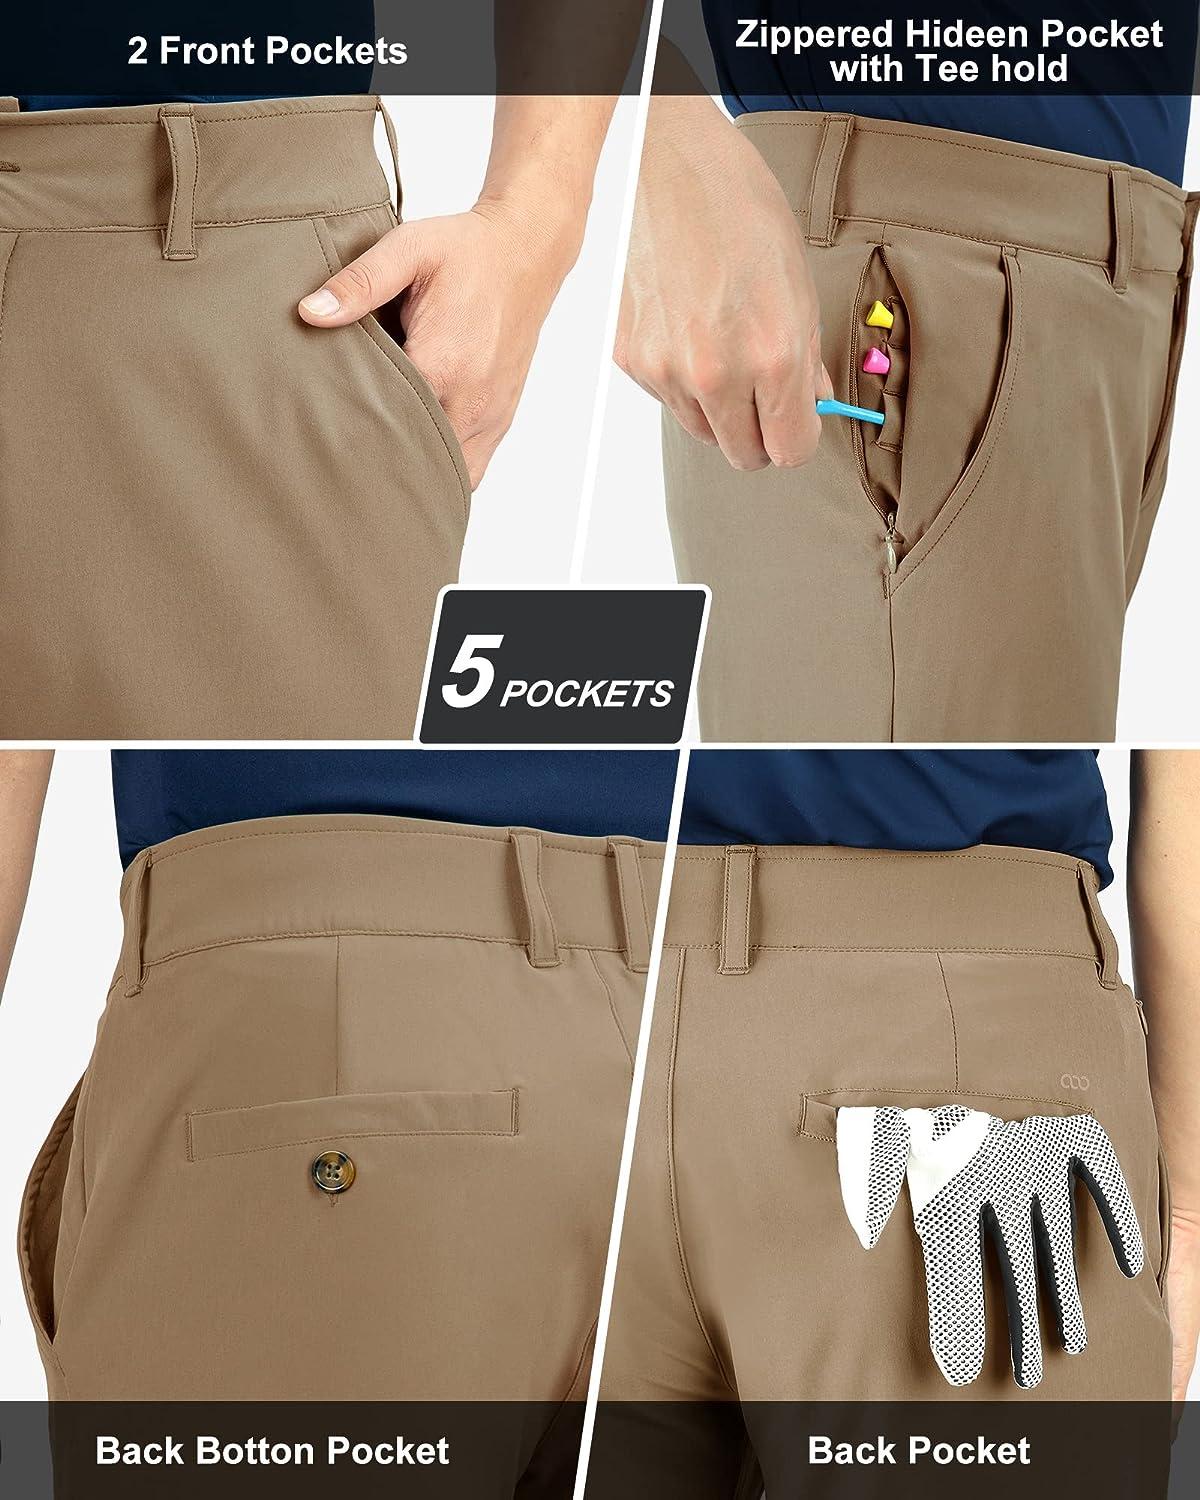 Men's Stretch Golf Shorts 5 Pockets 8 Quick Dry Shorts - Brown / S